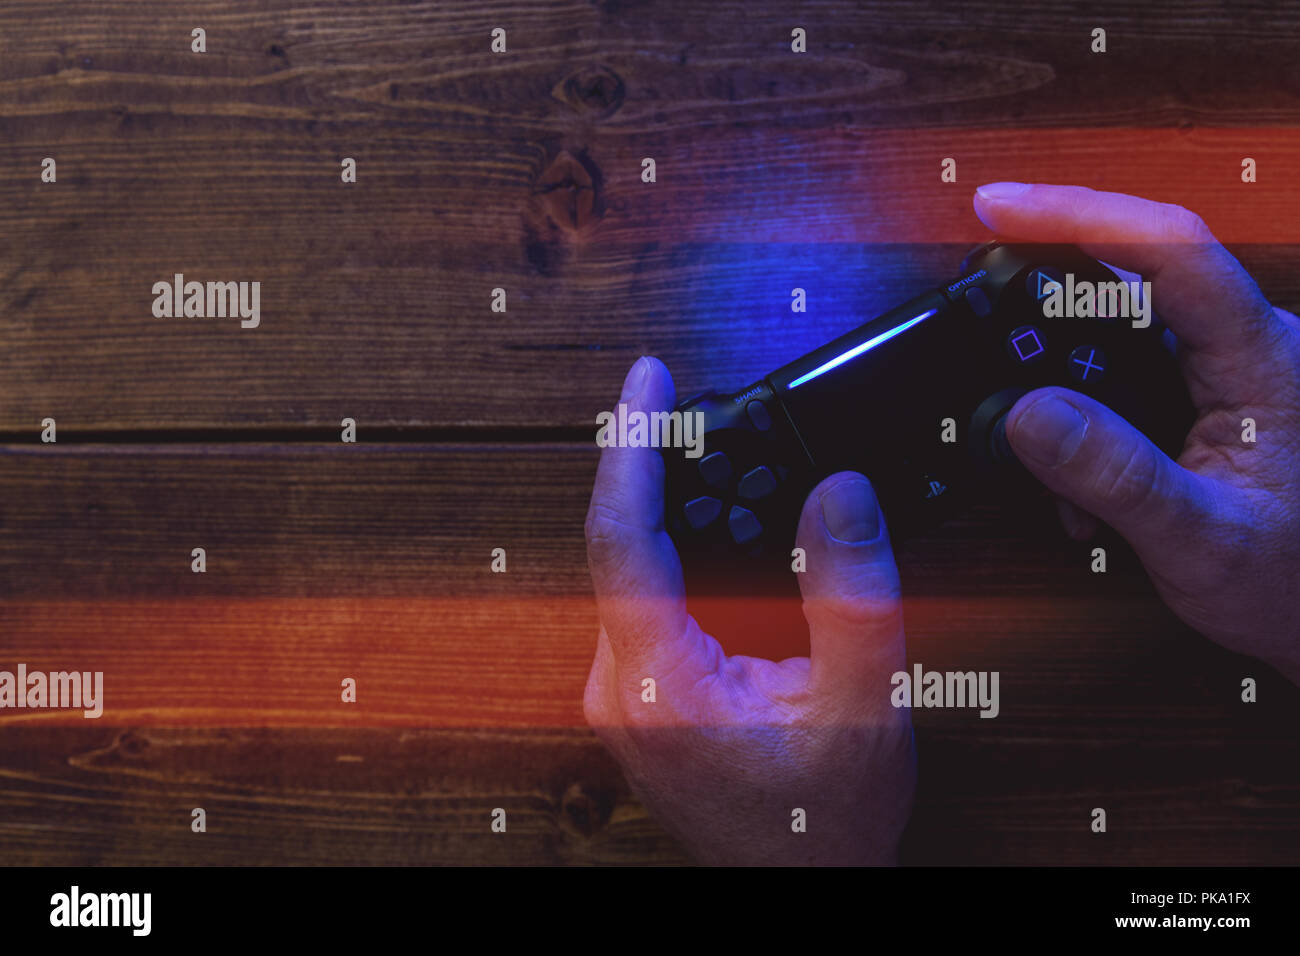 Man playing video games PlayStation gaming controller on wood background with lights Stock Photo